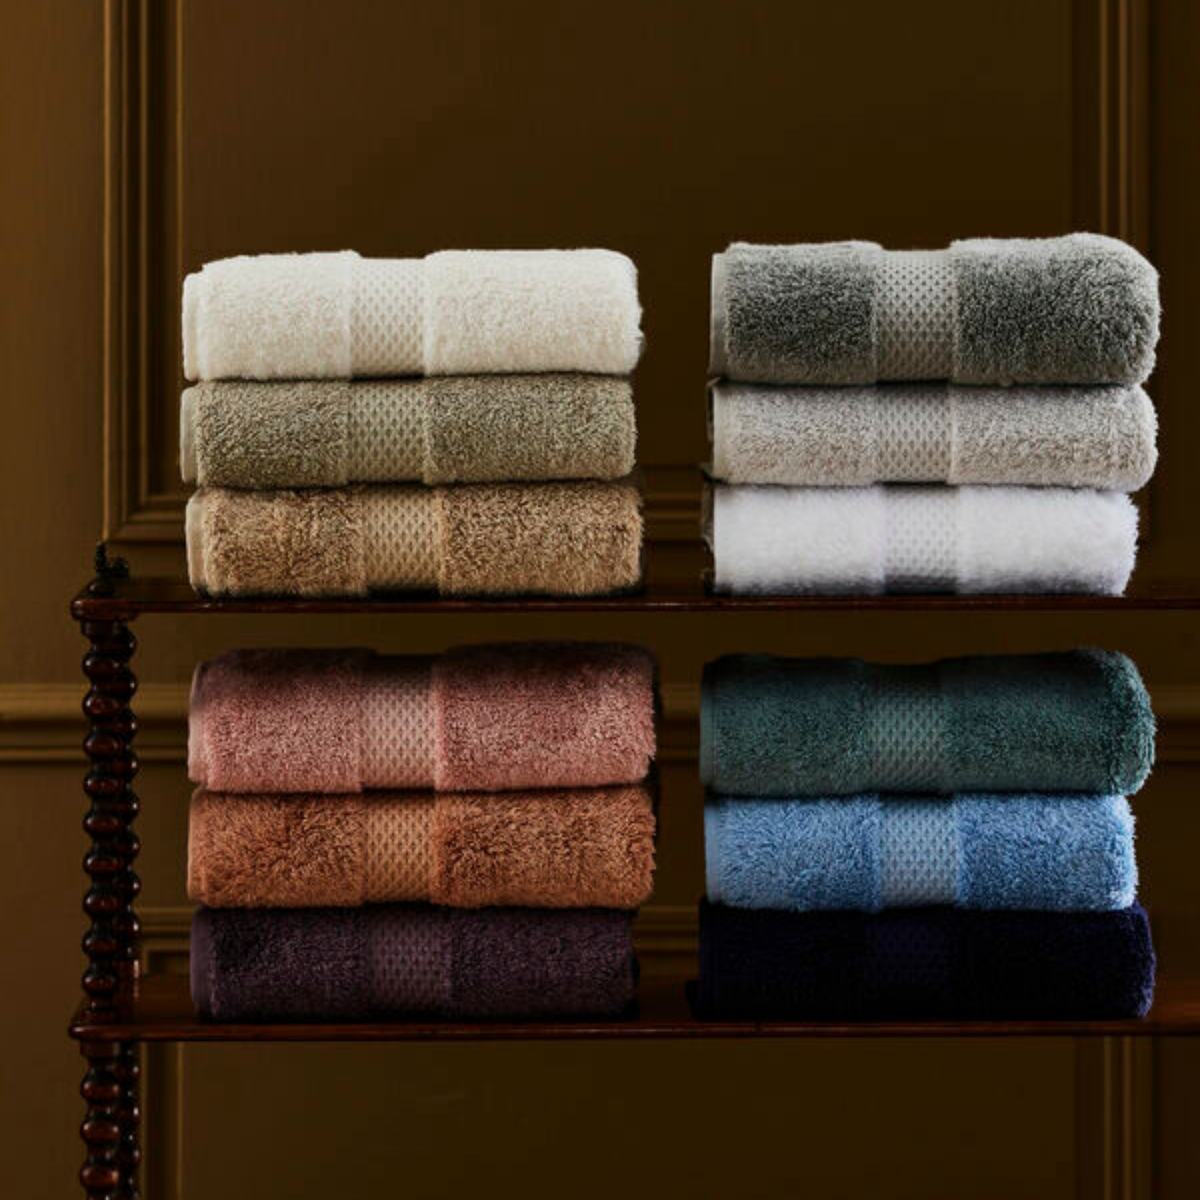 Stack of Yves Delorme Etoile Bath Towels Showing All Colors